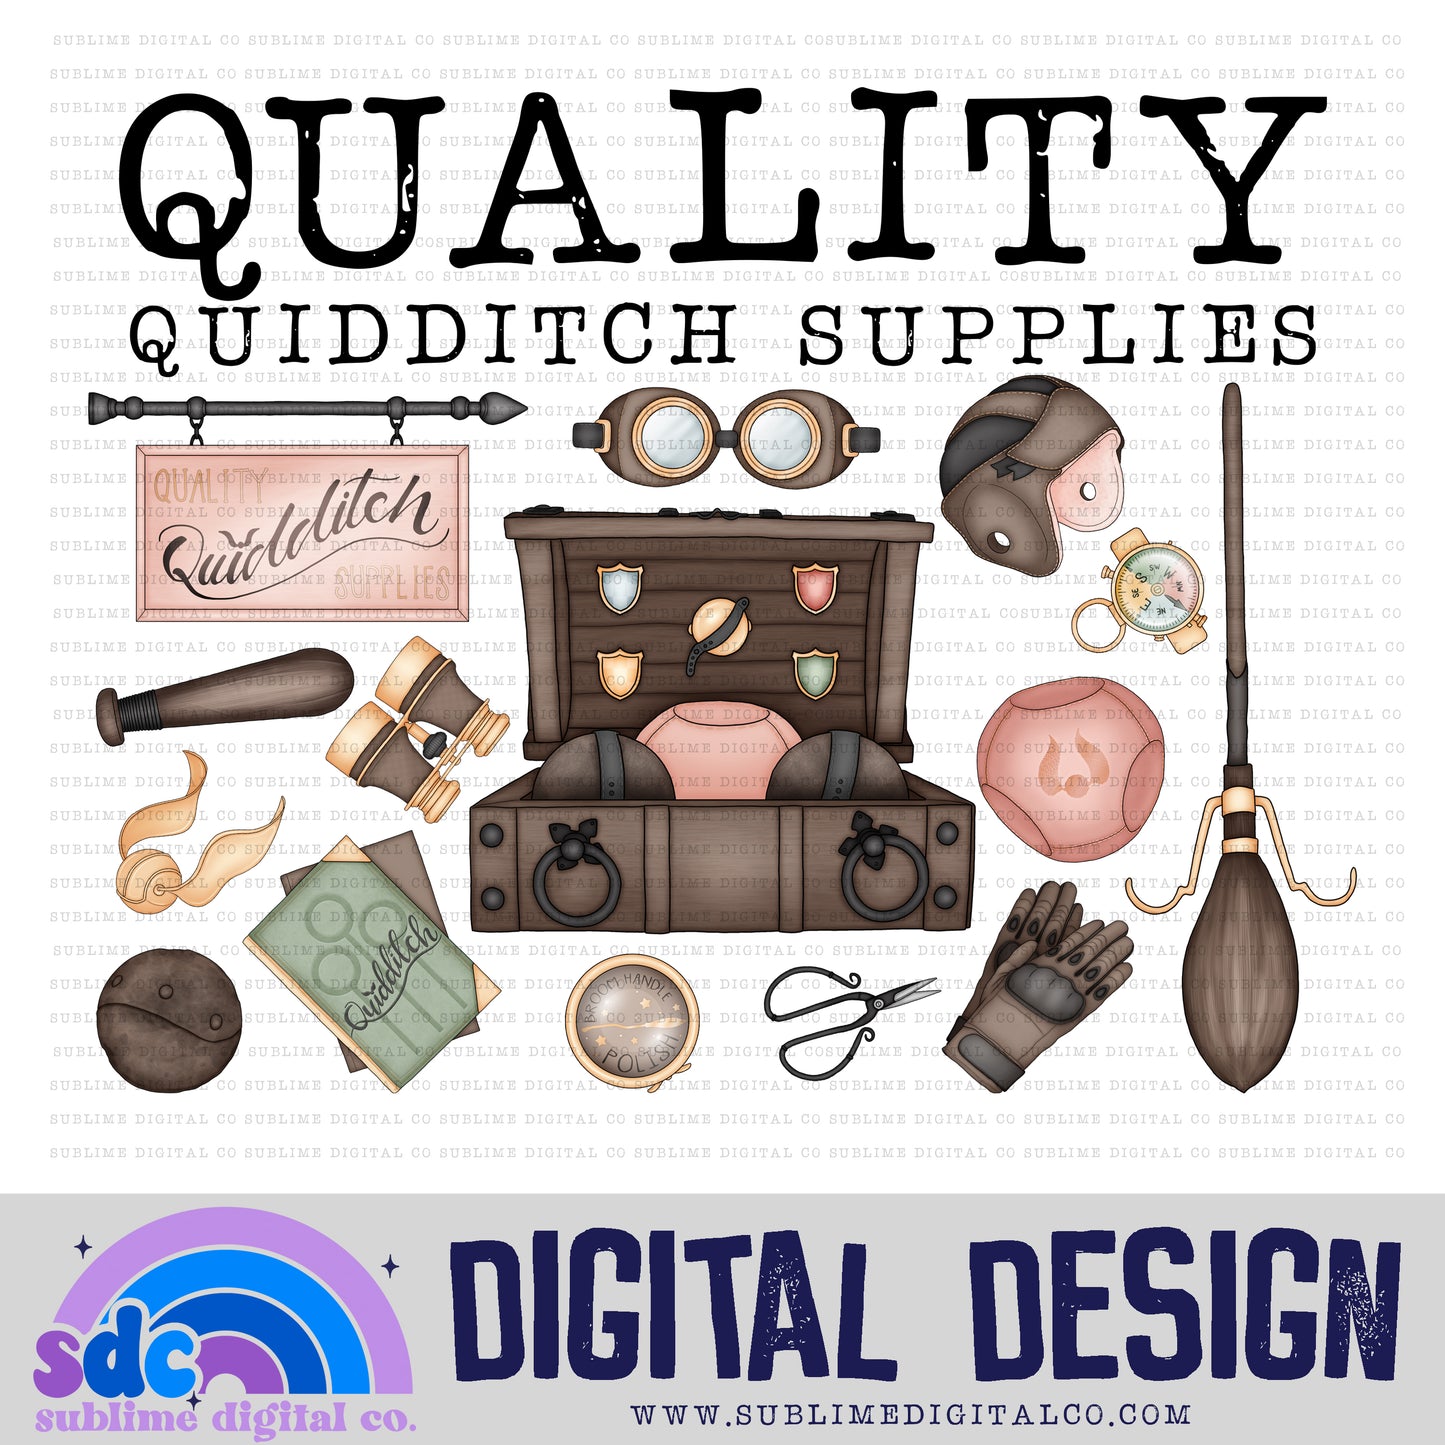 Quality Supplies • Wizard • Instant Download • Sublimation Design